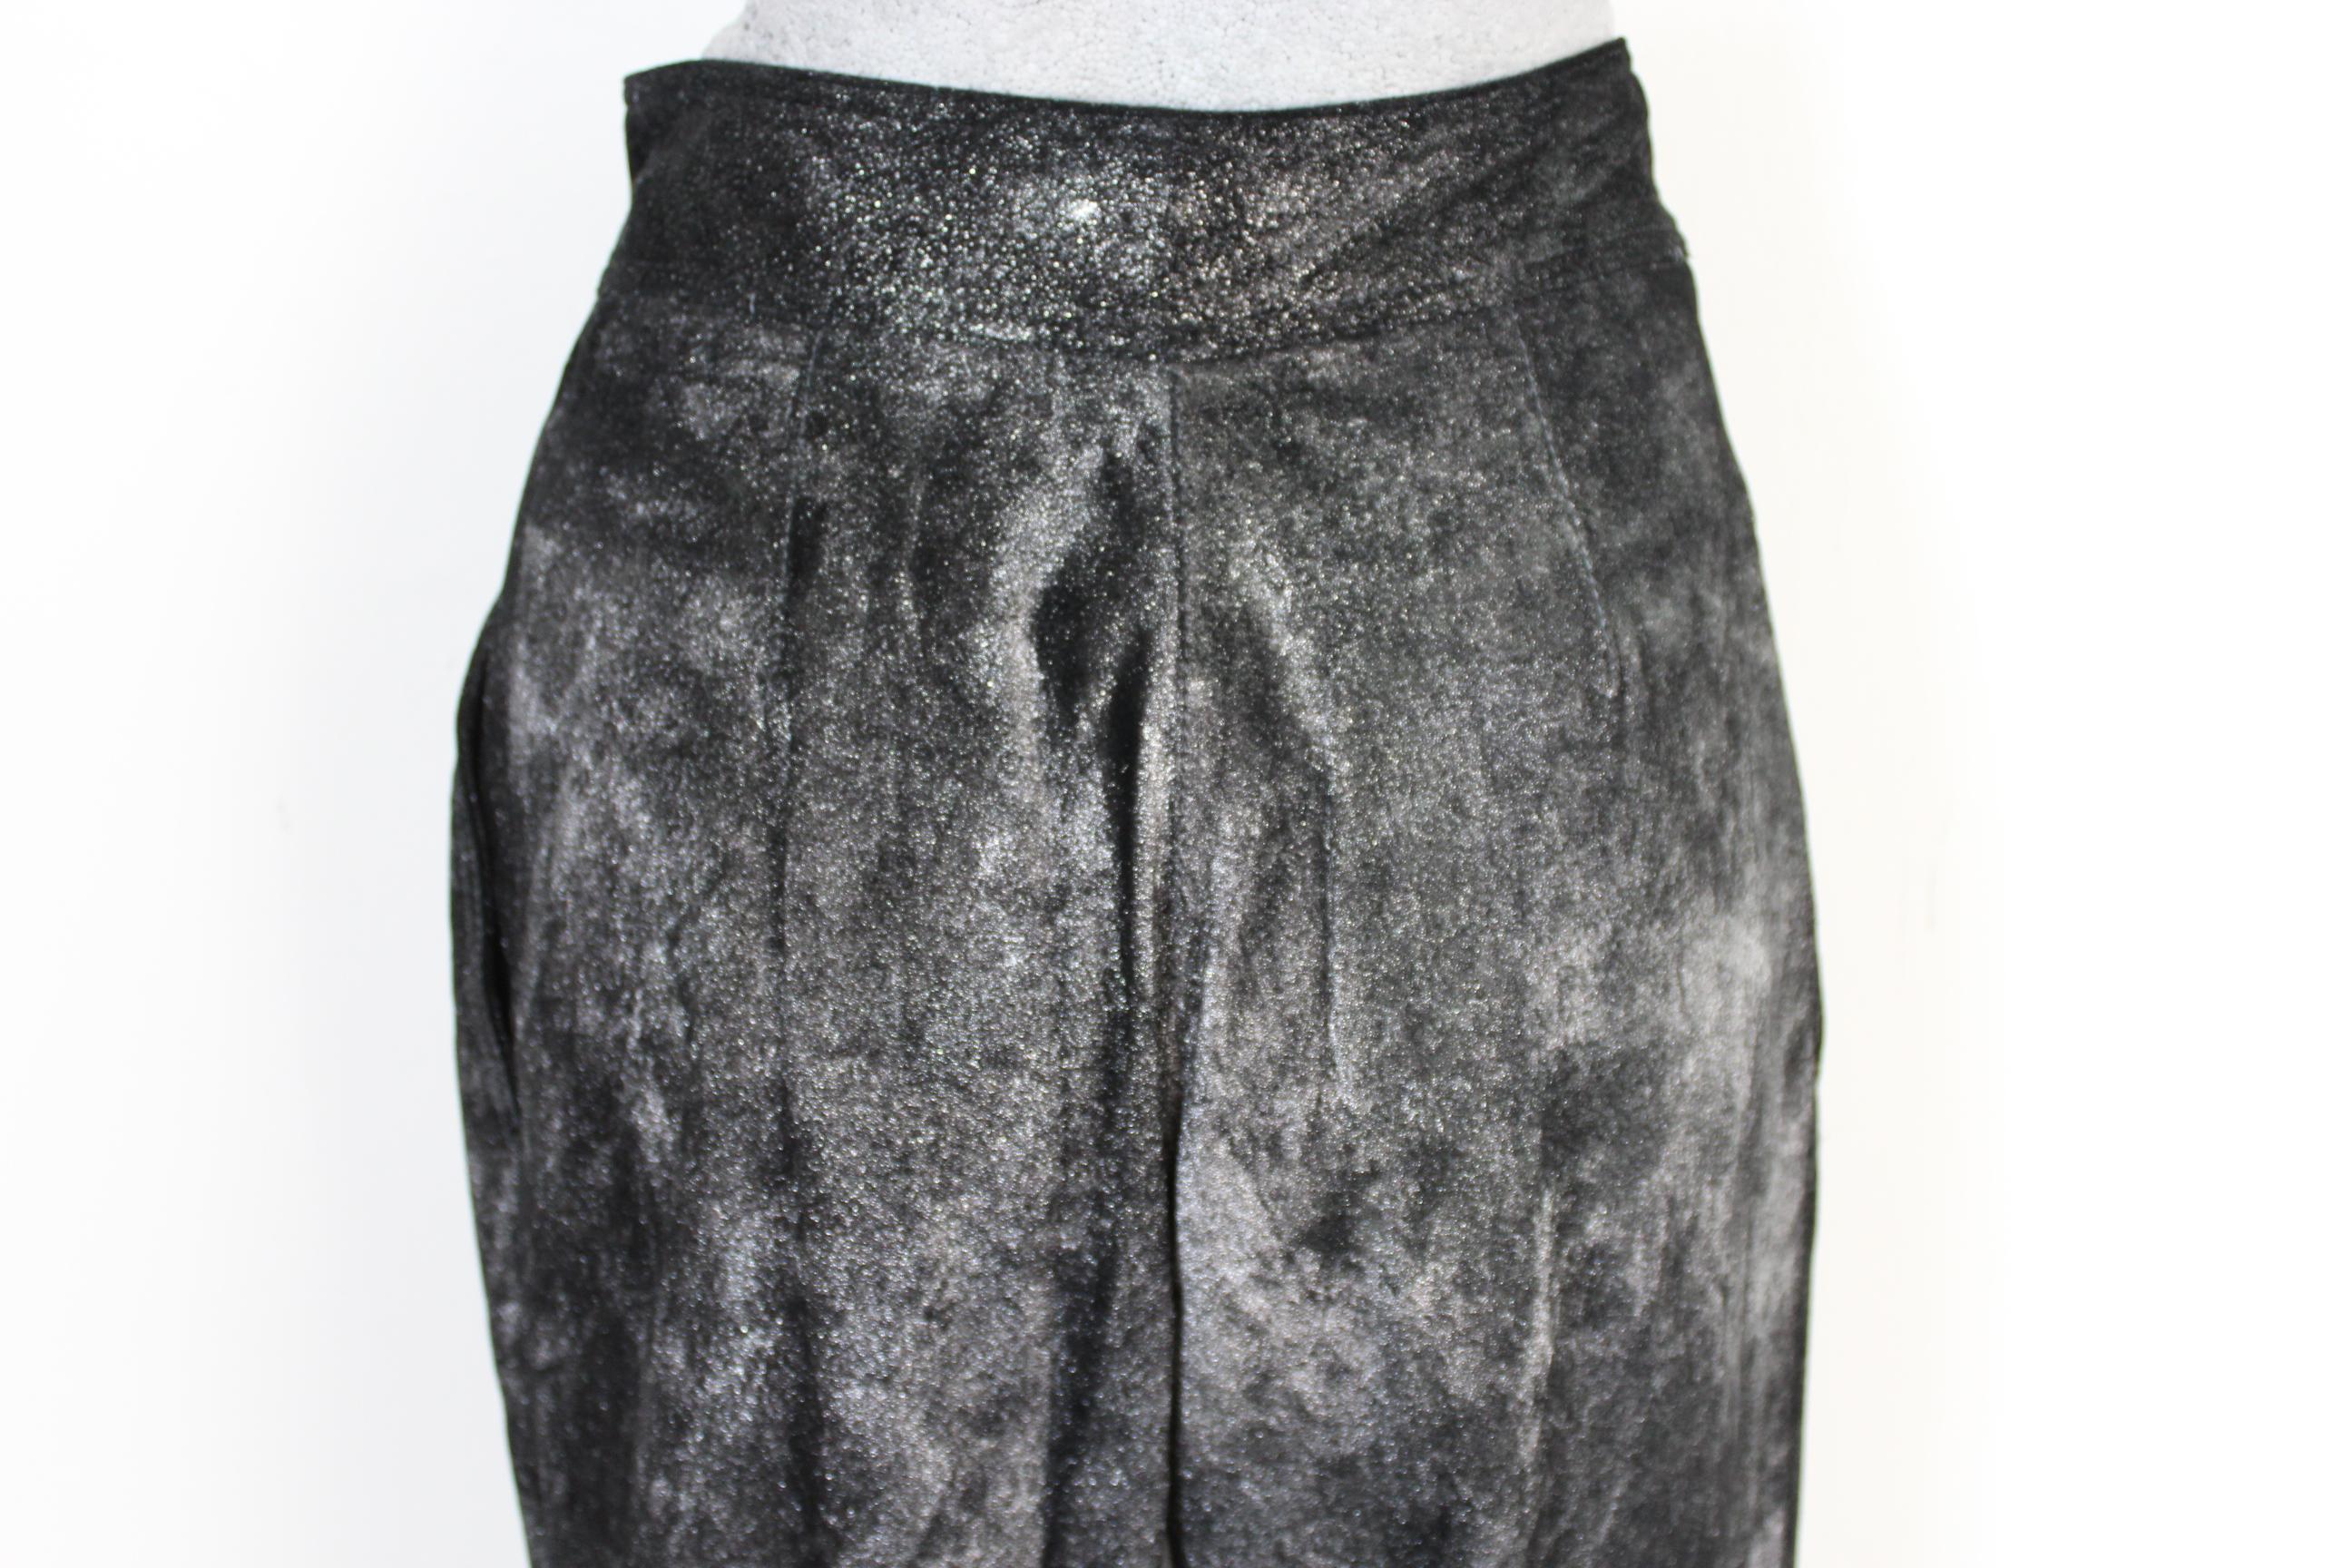 Krizia Black and Silver Pigskin Leather Lamè Iridescent Pants 1980s  Style NWT For Sale 2